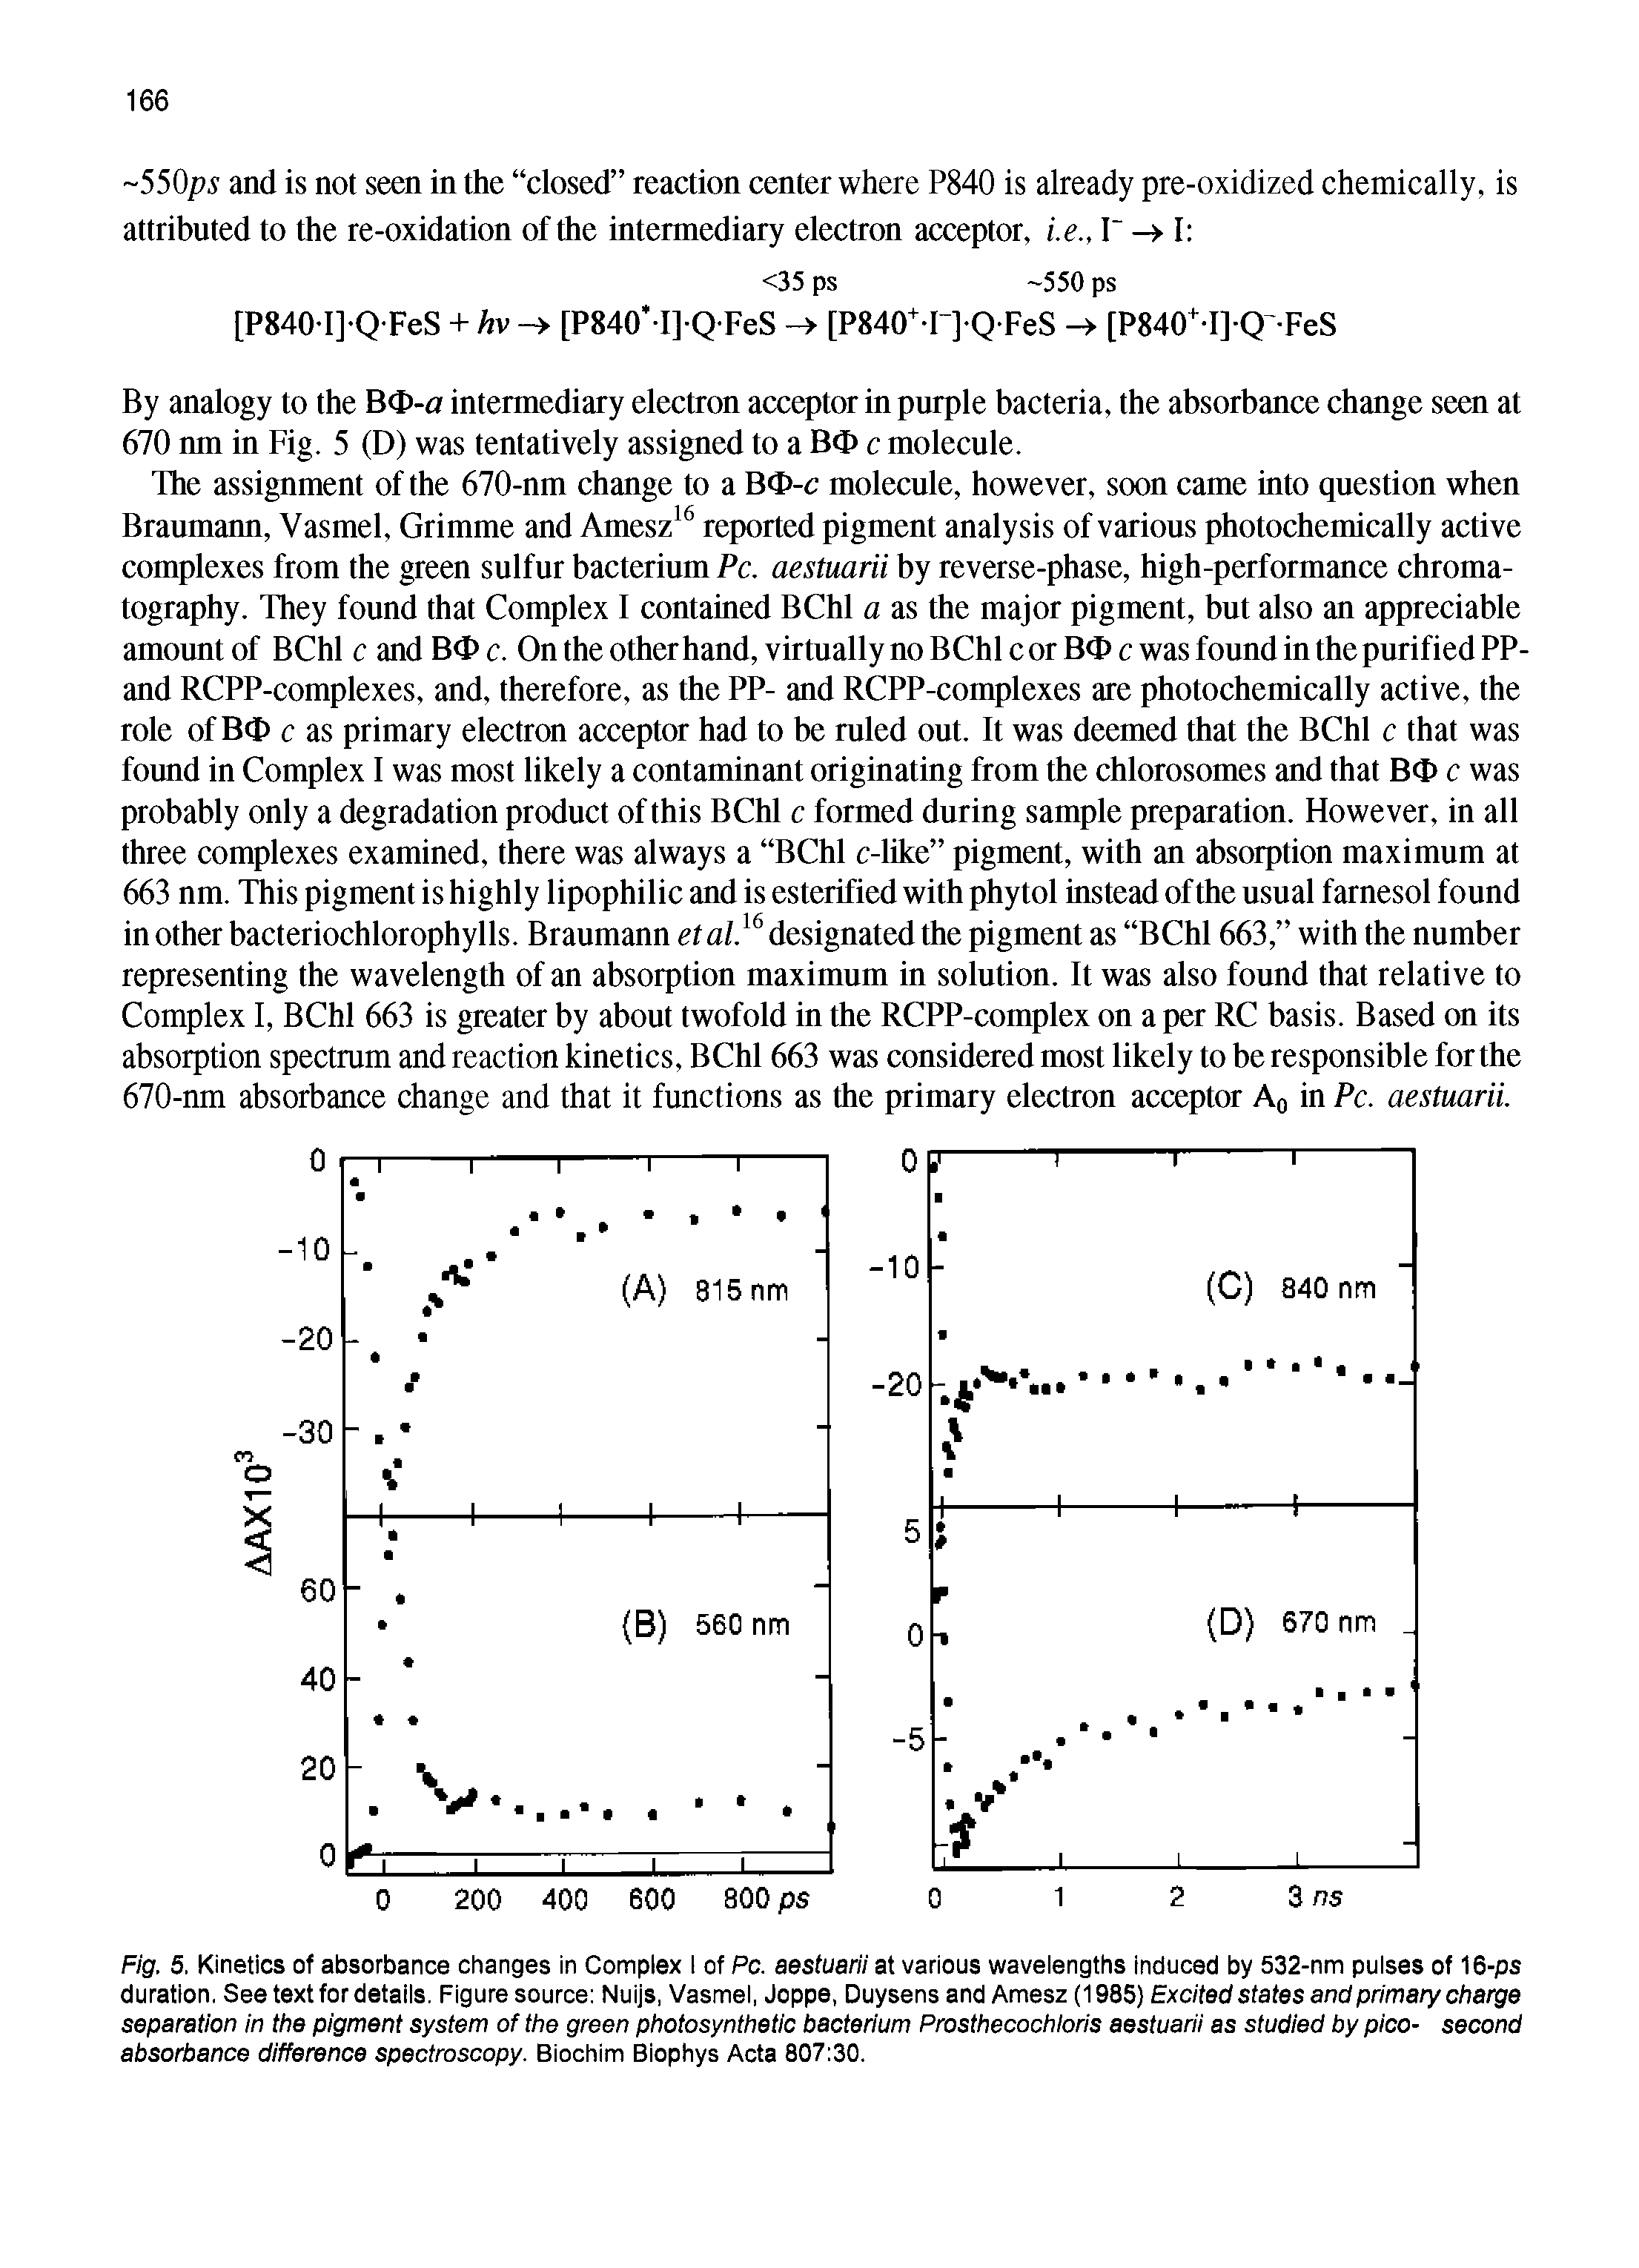 Fig. 5. Kinetics of absorbance changes in Complex I of Pc. aestuarii at various waveiengths induced by 532-nm puises of 16-ps duration. See text for details. Figure source Nuijs, Vasmei, Joppe, Duysens and Amesz (1985) Excited states and primary charge separation in the pigment system of the green photosynthetic bacterium Prosthecochloris aestuarii as studied by pico- second absorbance difference spectroscopy. Biochim Biophys Acta 807 30.